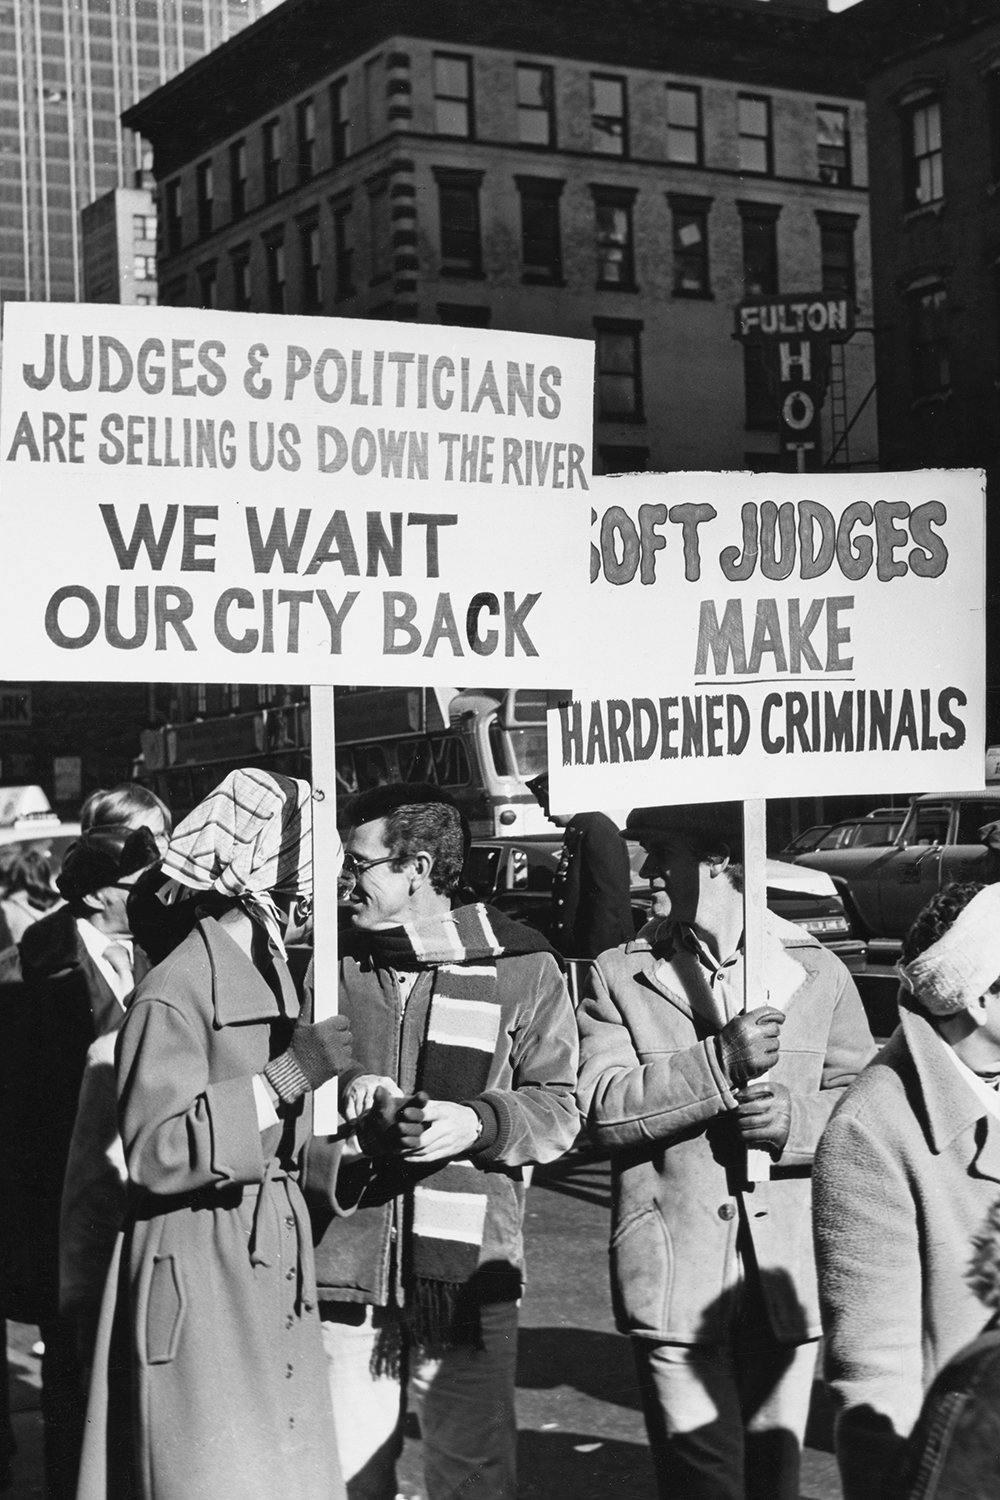 Protesters marching in the Times Square area demonstrating against the closure of entertainment and nightlife venues and the rise of illicit businesses, New York City, US, 1976. 